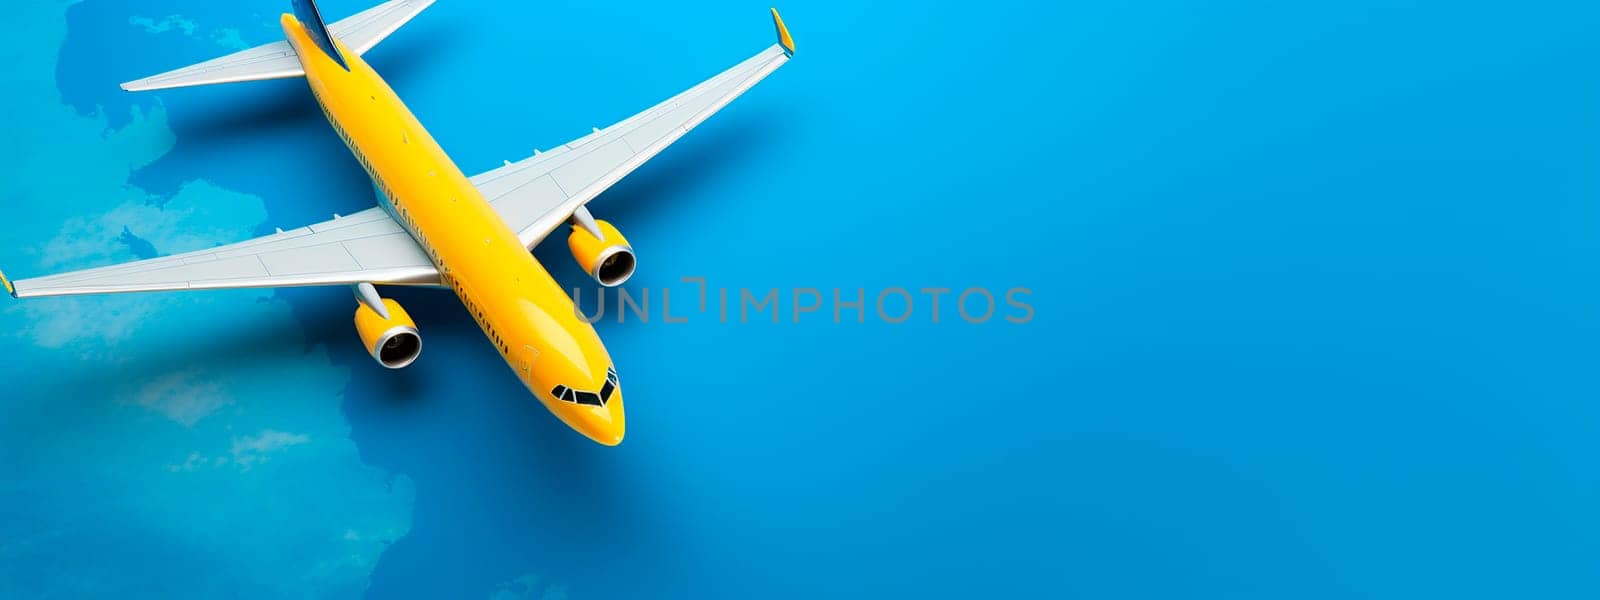 An airplane on a blue and yellow map background. Selective focus. by yanadjana